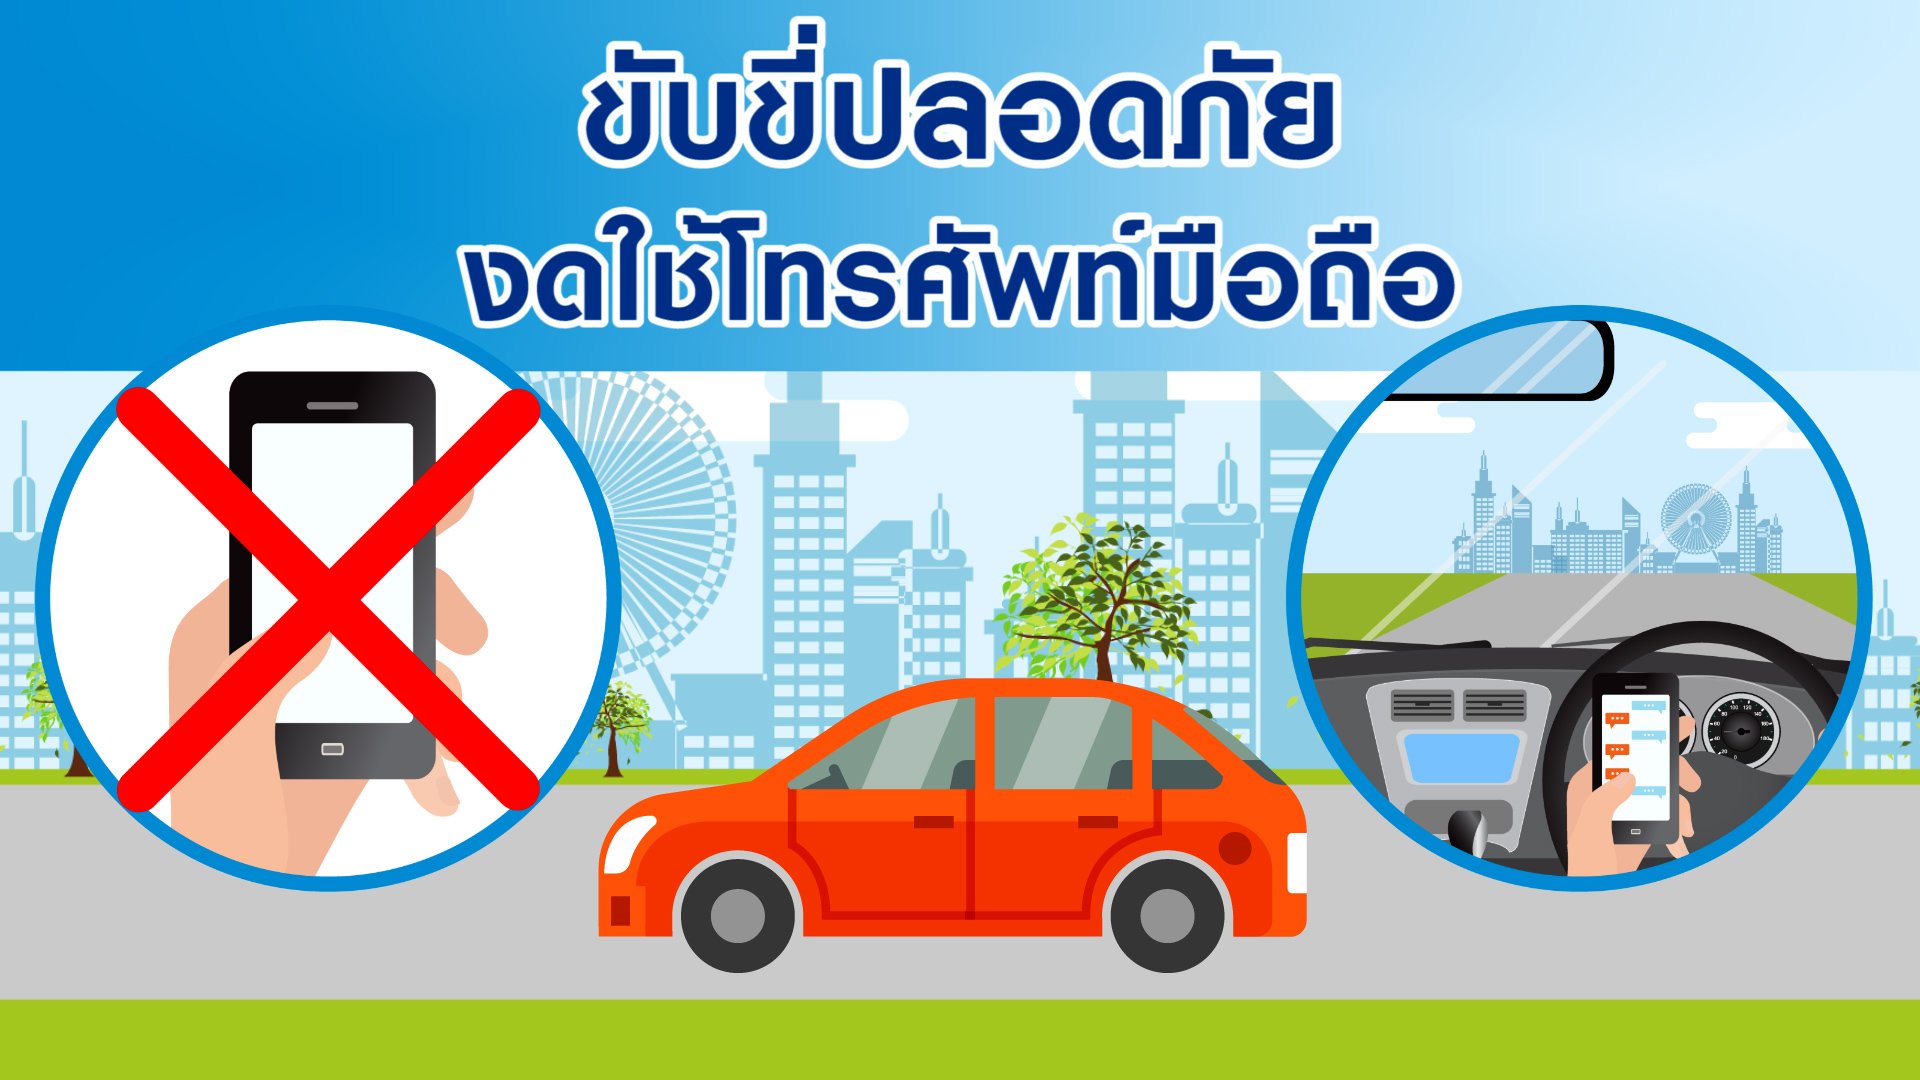 Drive safely Refrain from using mobile phones while driving. With best wishes from GPS DiStar